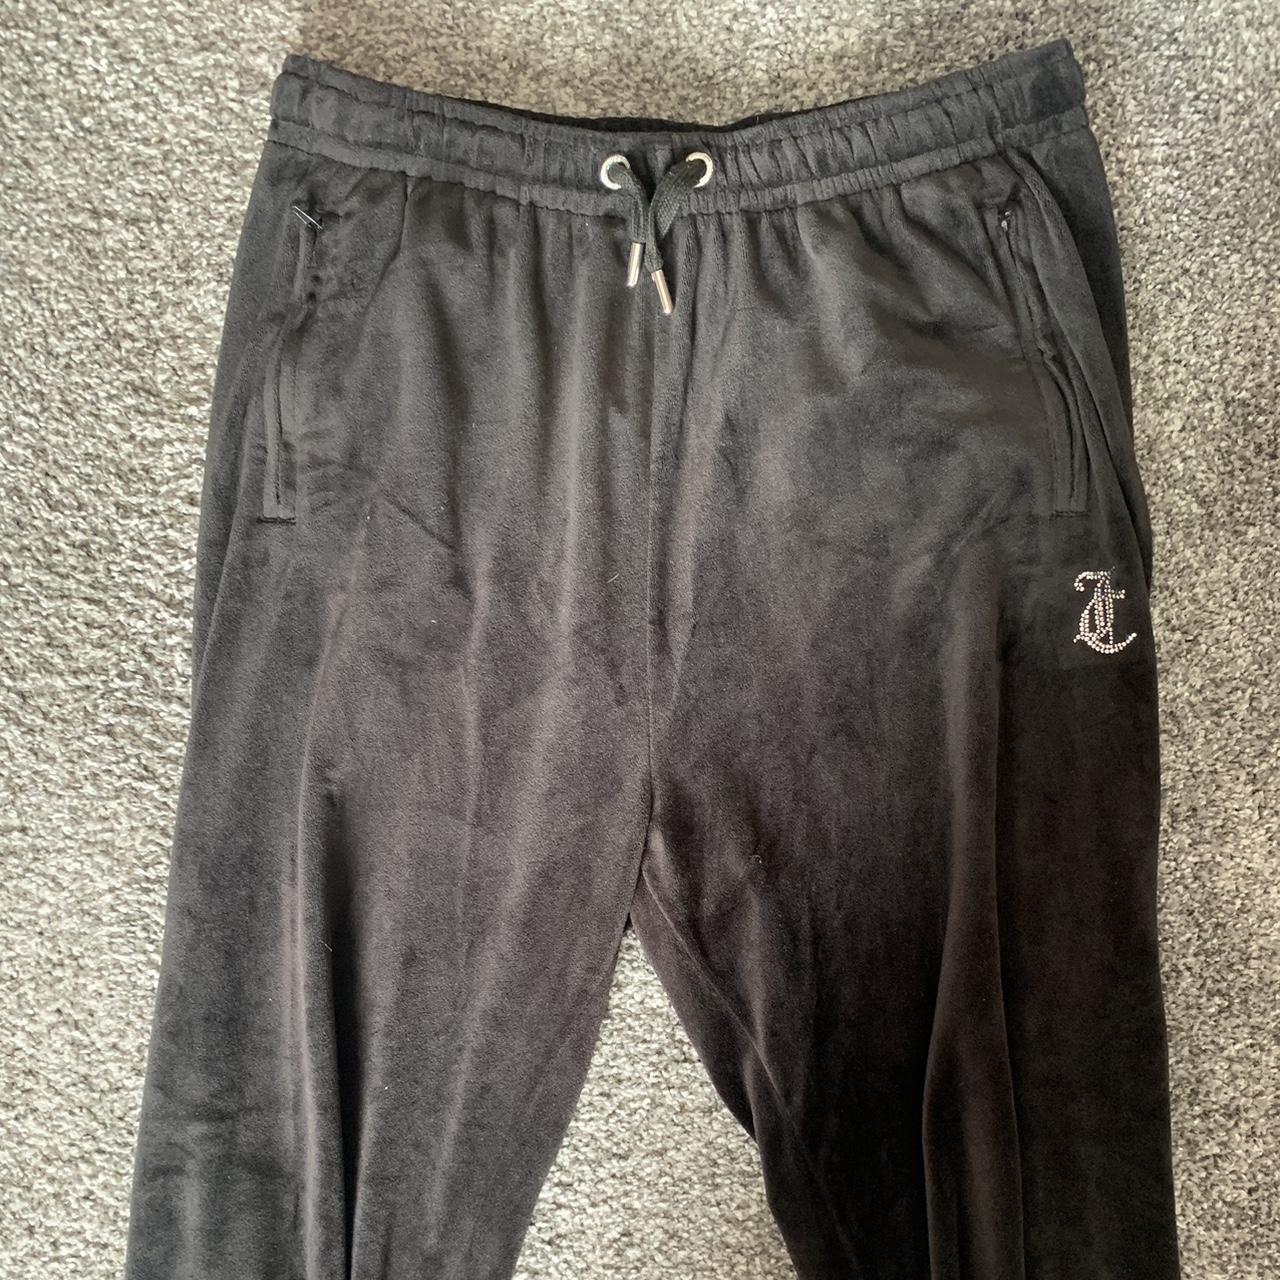 Juicy couture joggers. #juicycouture - Depop